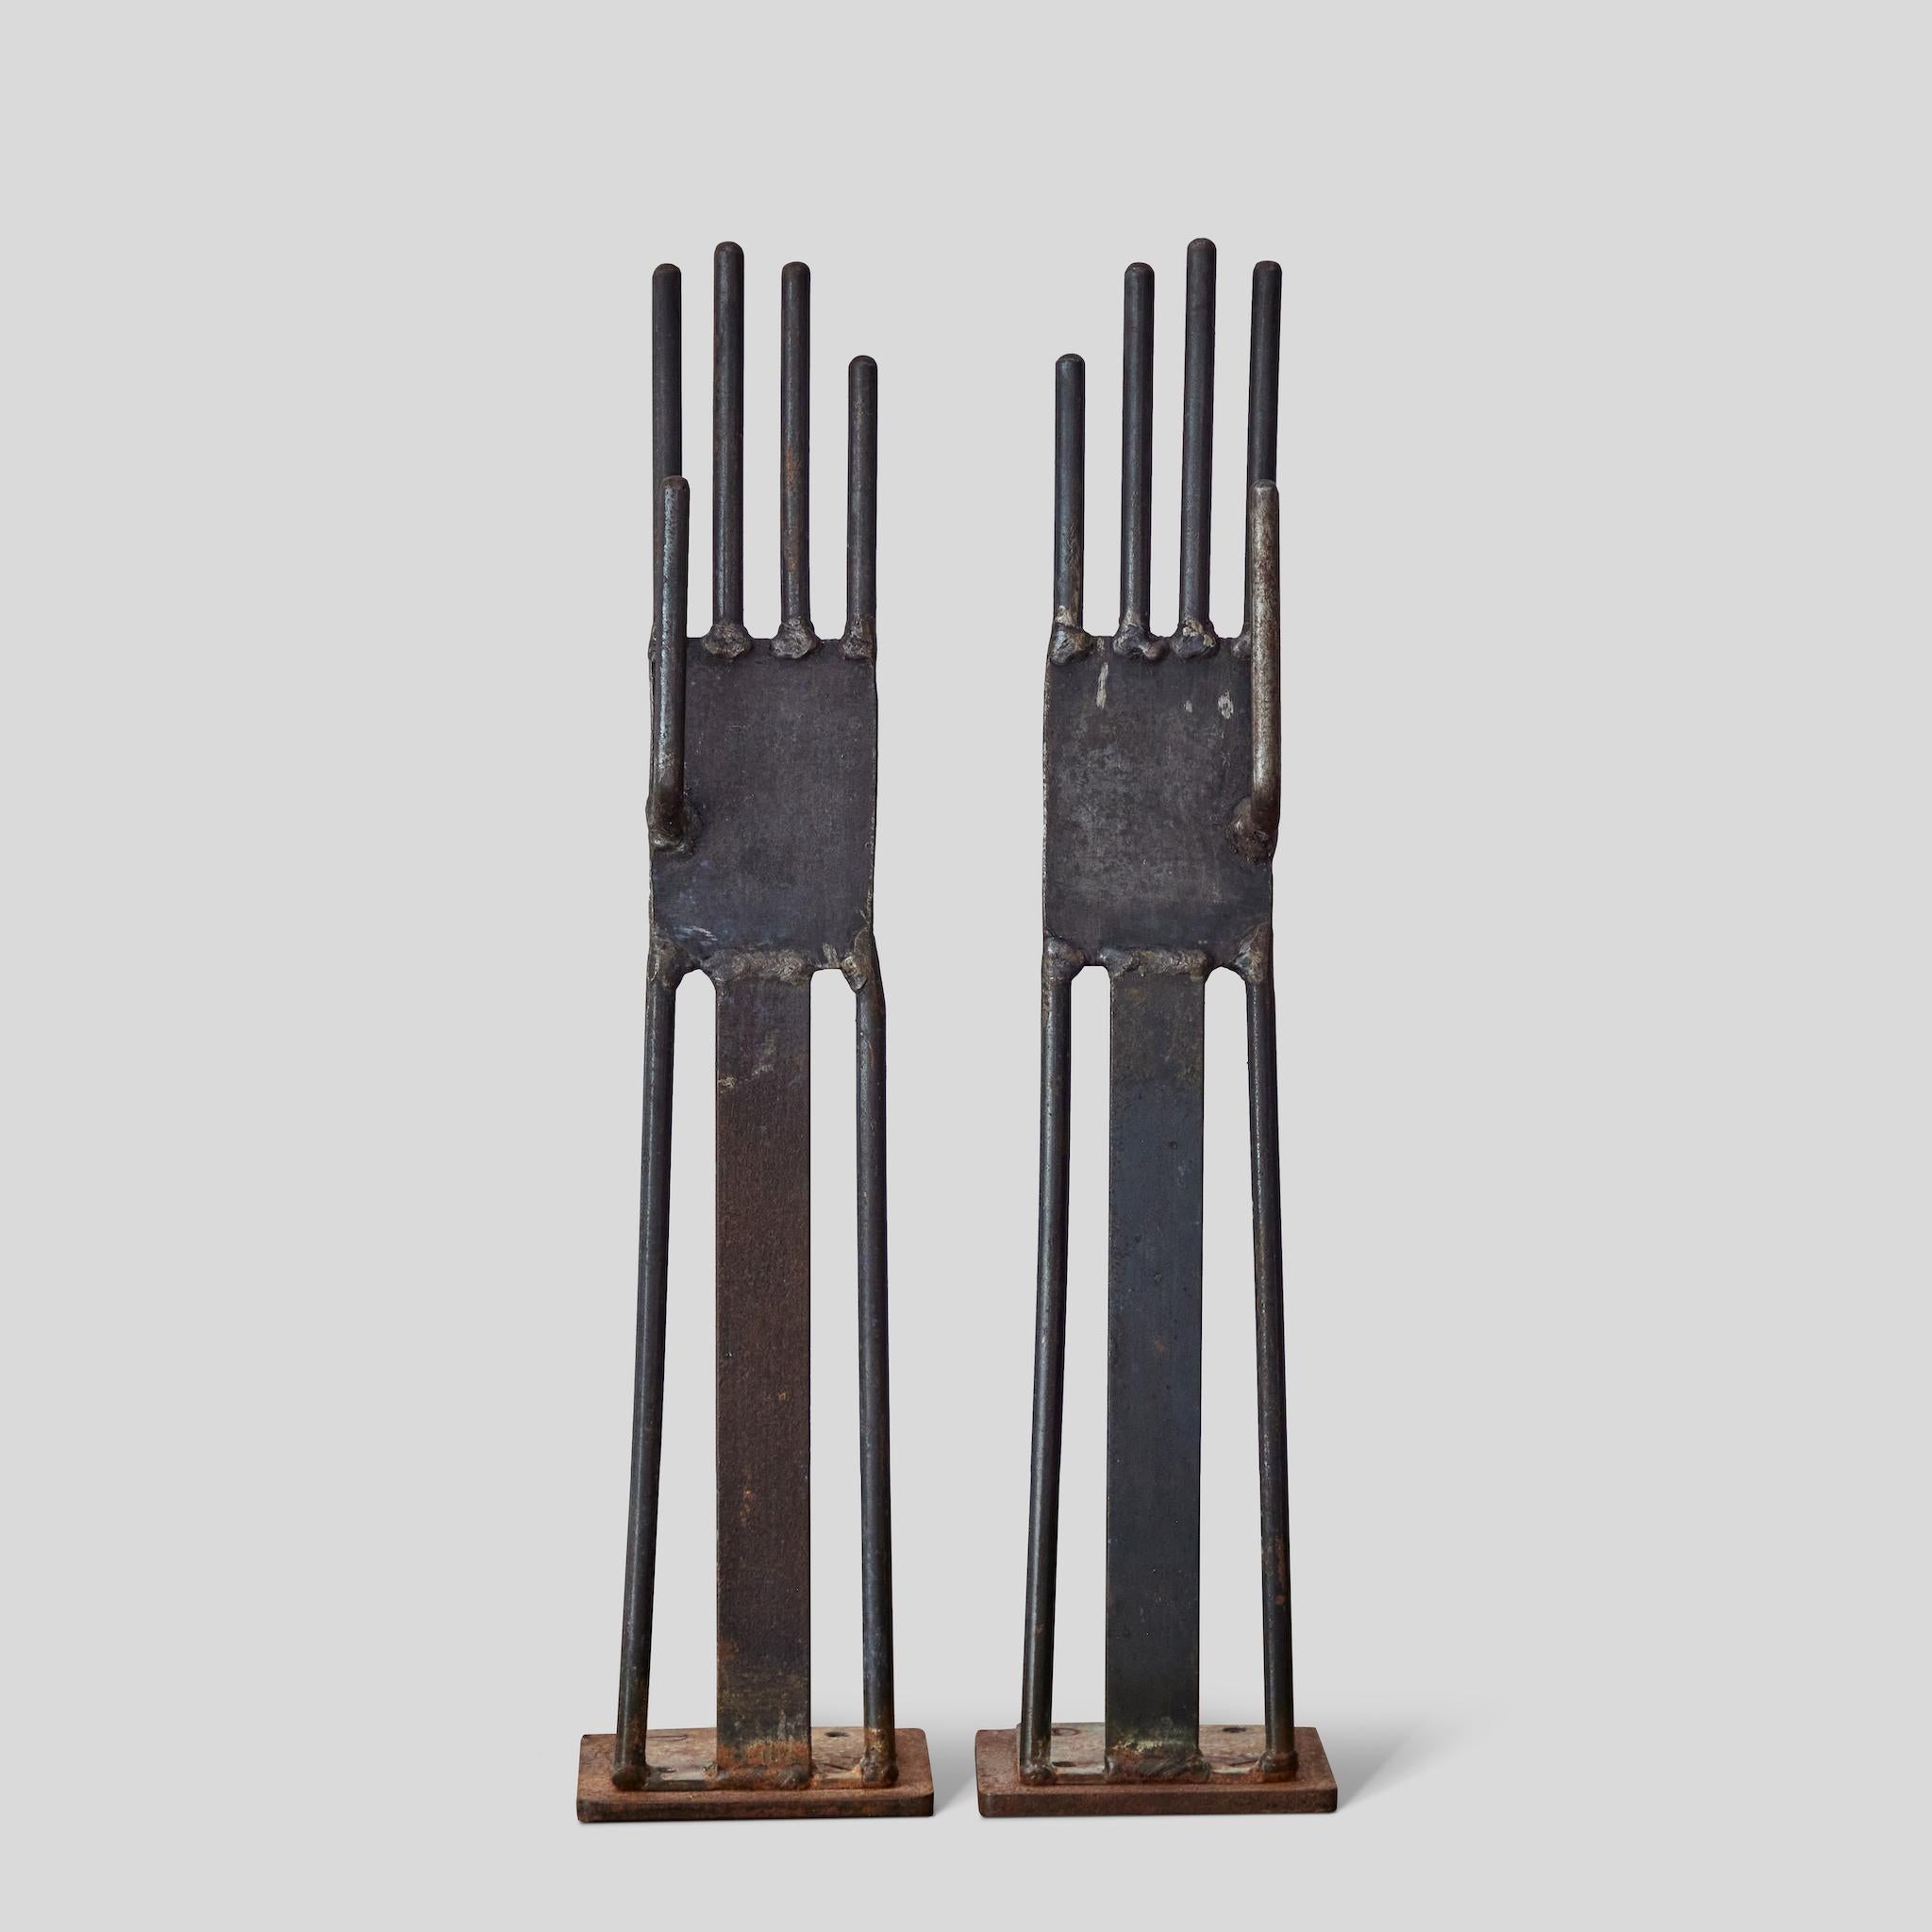 A pair of glove molds in metal (sizes may vary). Originating in France, circa 1910.